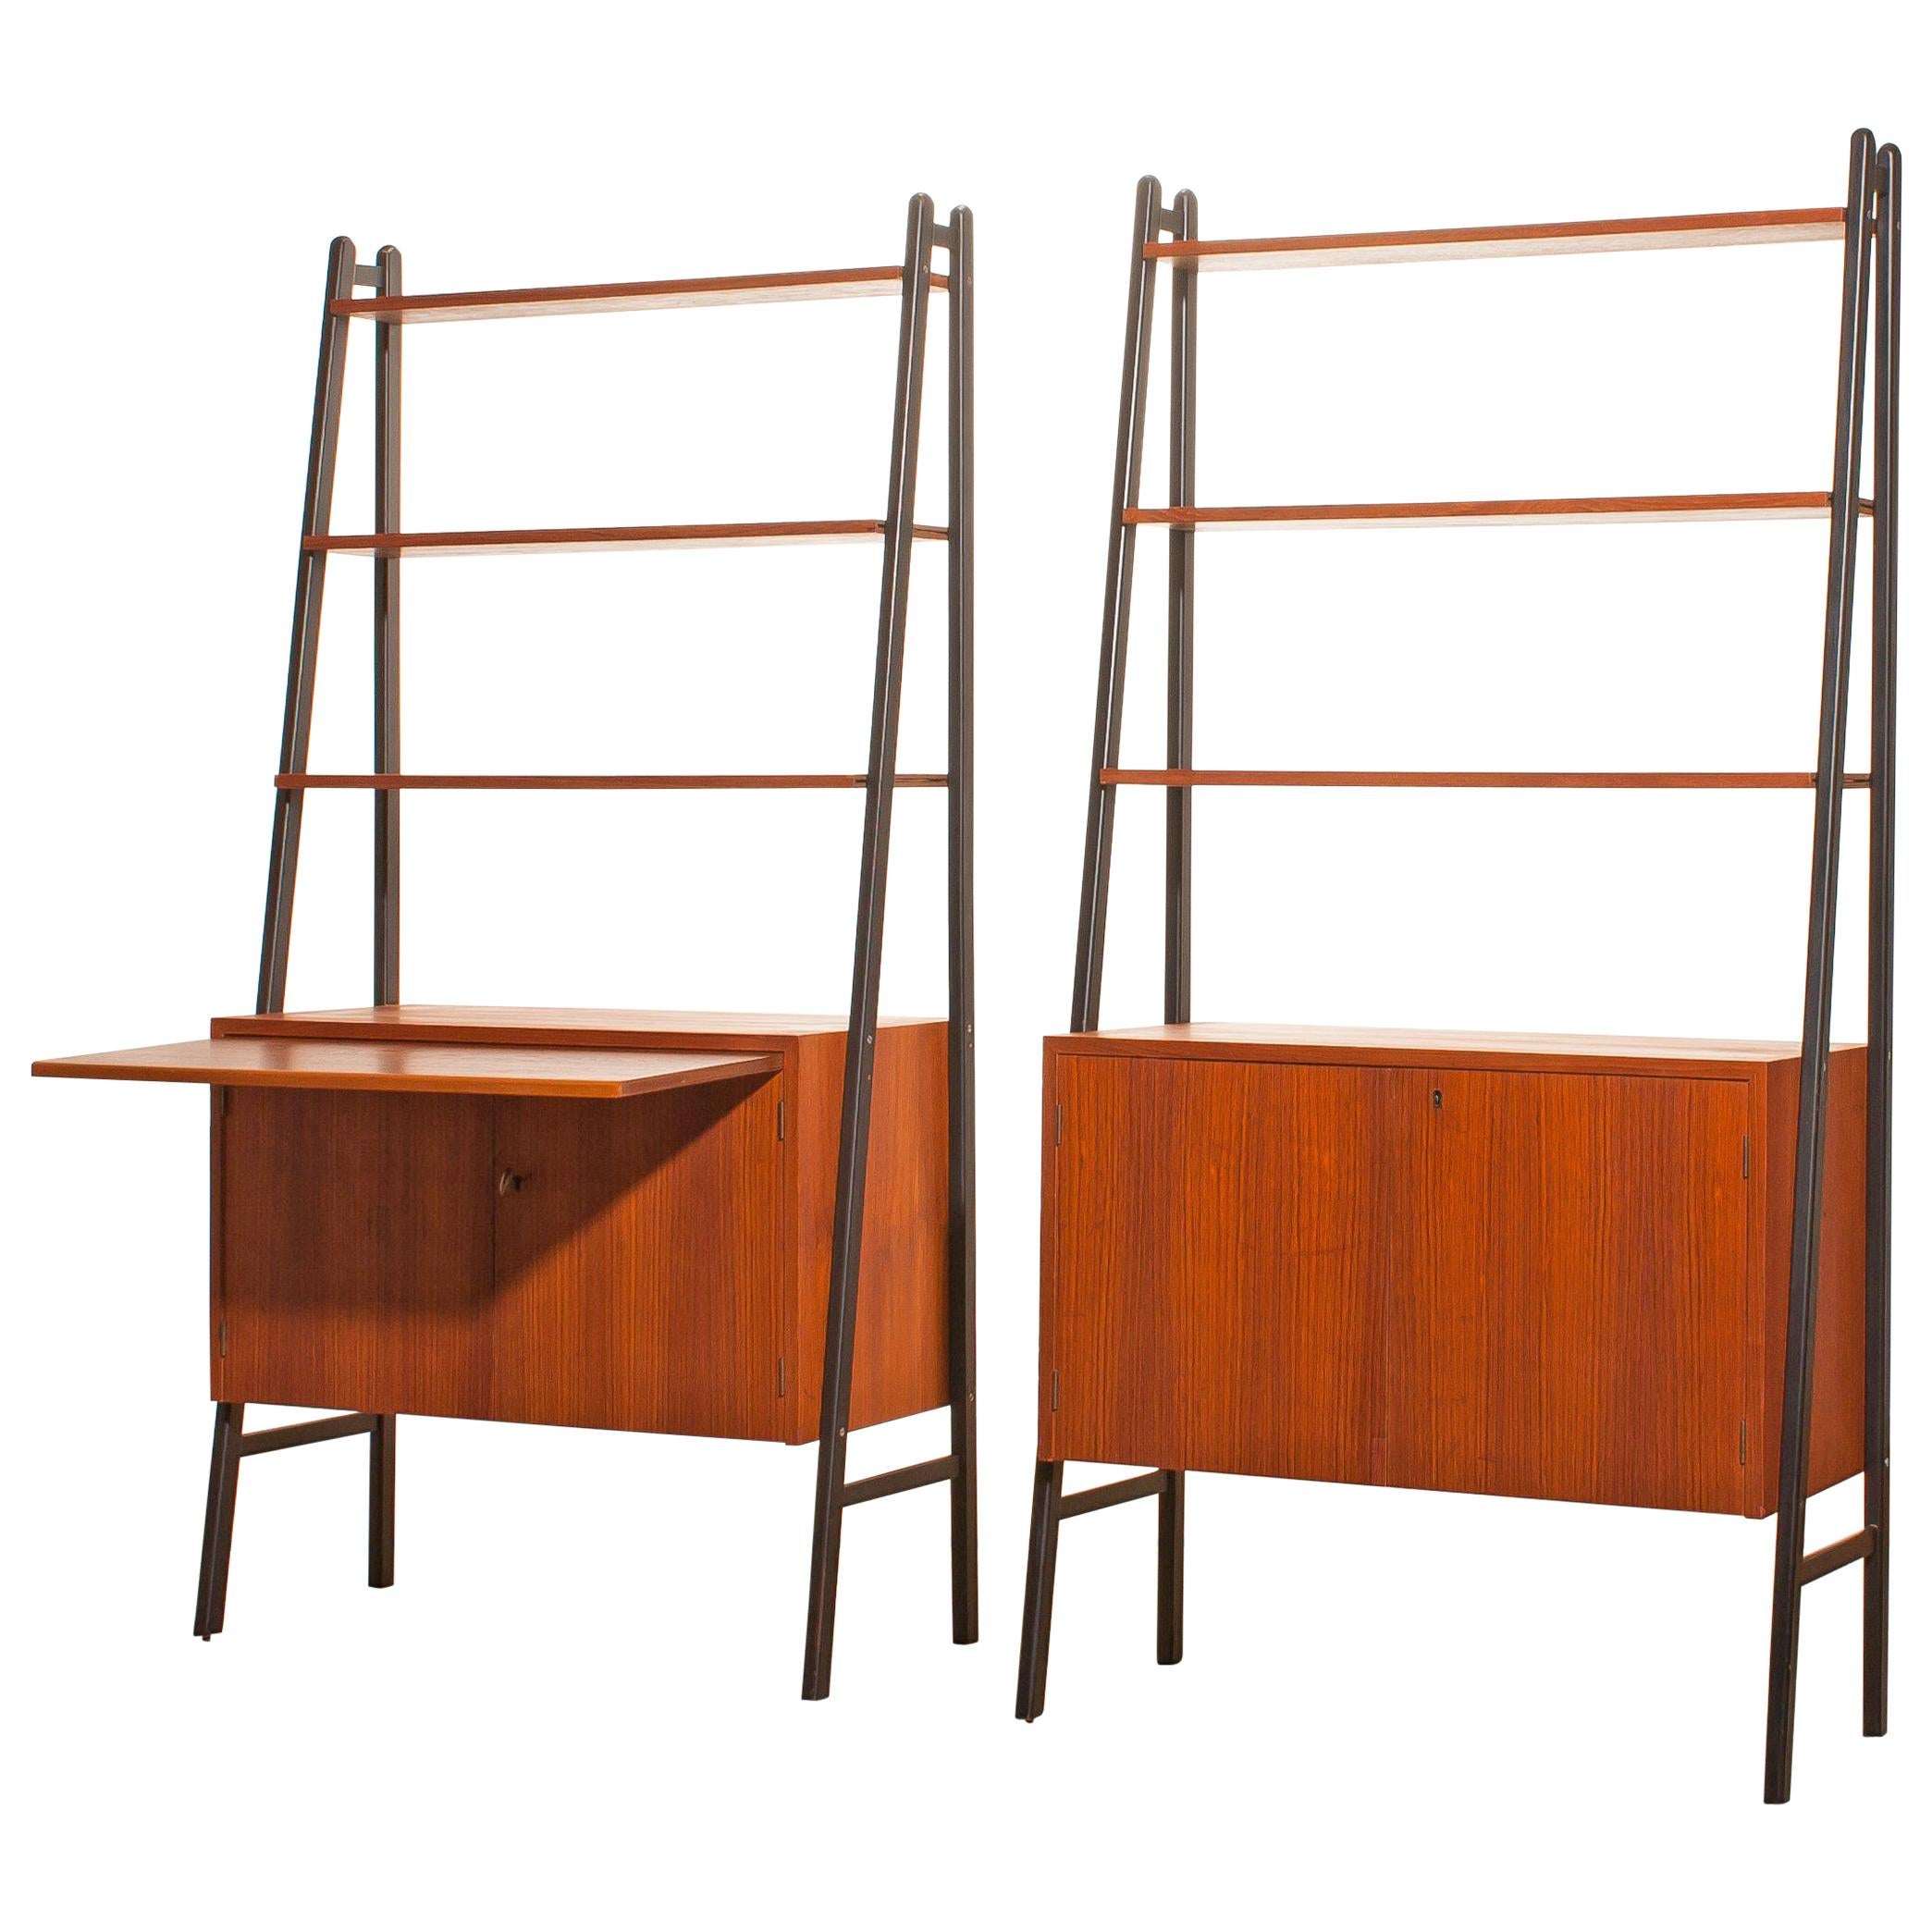 1950s, Set of Two Teak Bookcases Room Dividers Cabinets